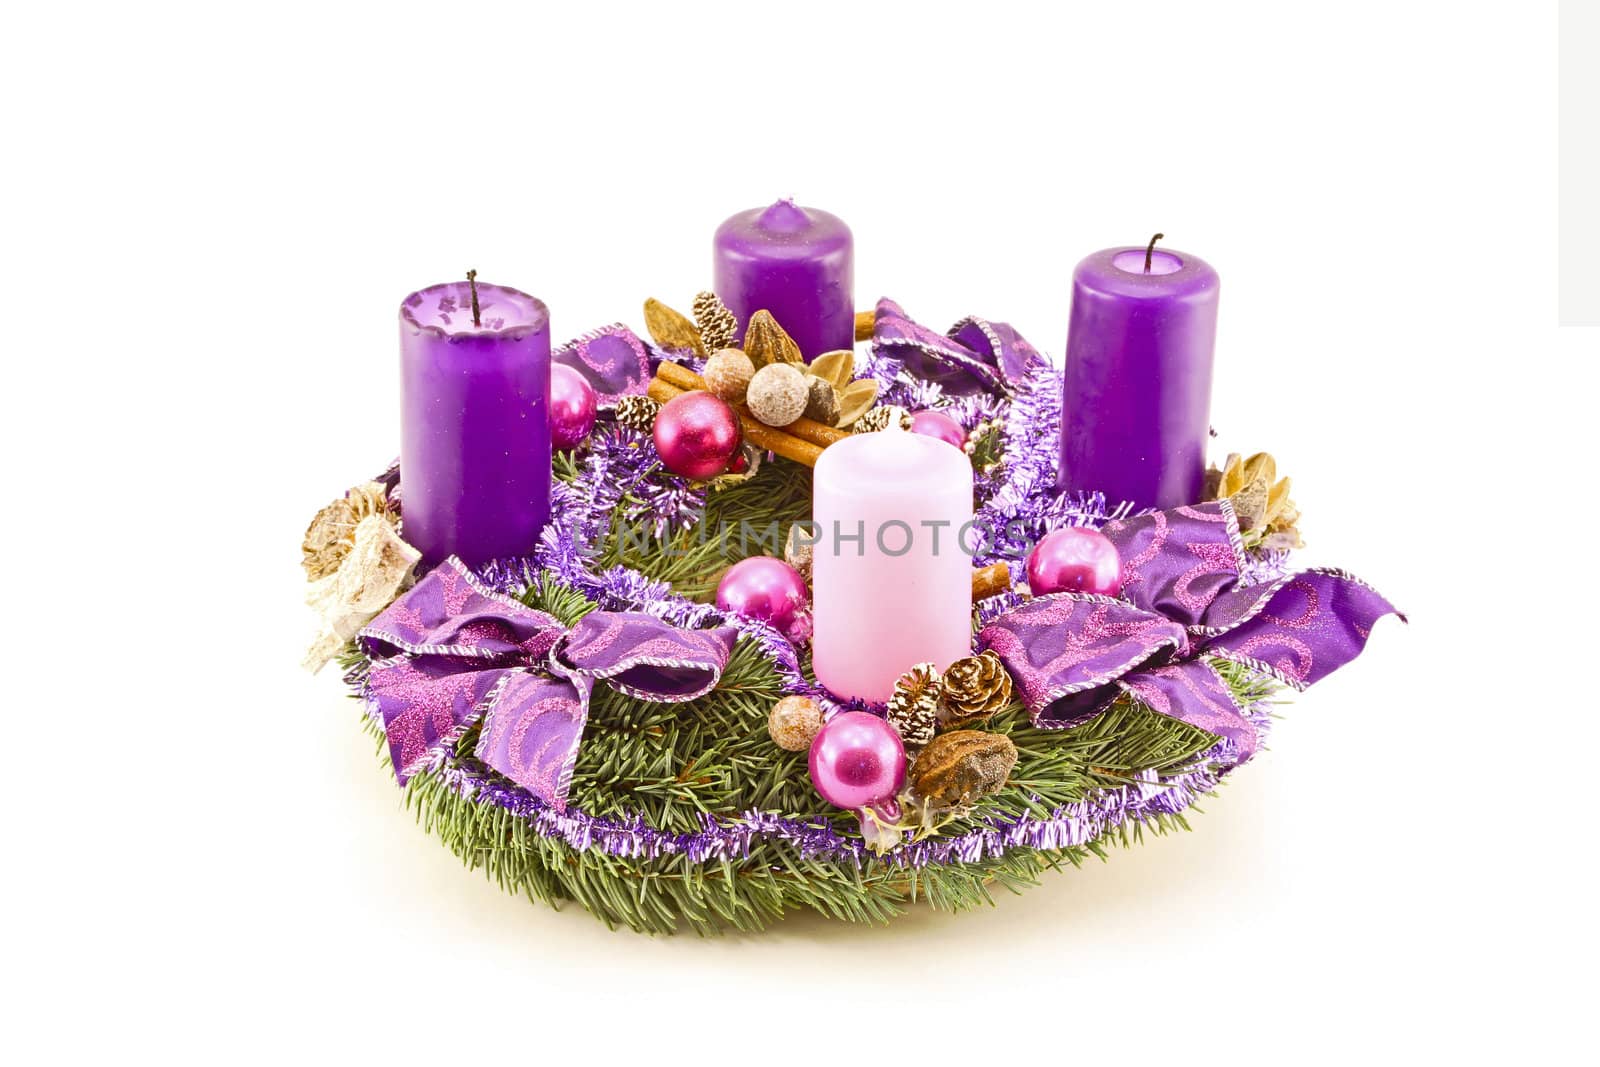 Advent wreath decorated with purple candles and christmas ornaments